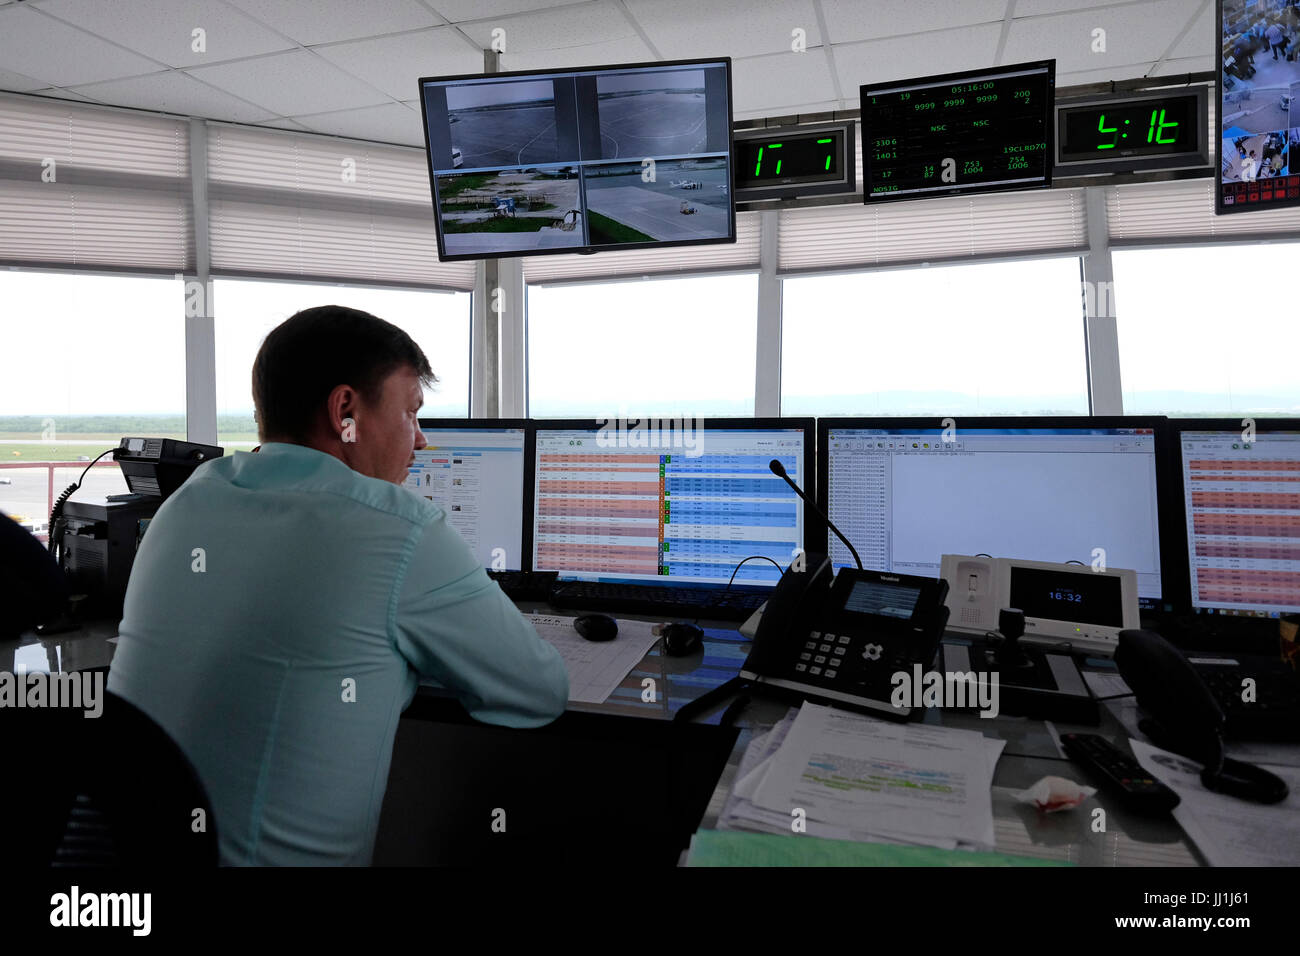 Air traffic controller monitors flights at the control tower of Yuzhno-Sakhalinsk Airport also called Khomutovo in the city of Yuzhno-Sakhalinsk, in the island of Sakhalin, in the Pacific Ocean. Russia Stock Photo